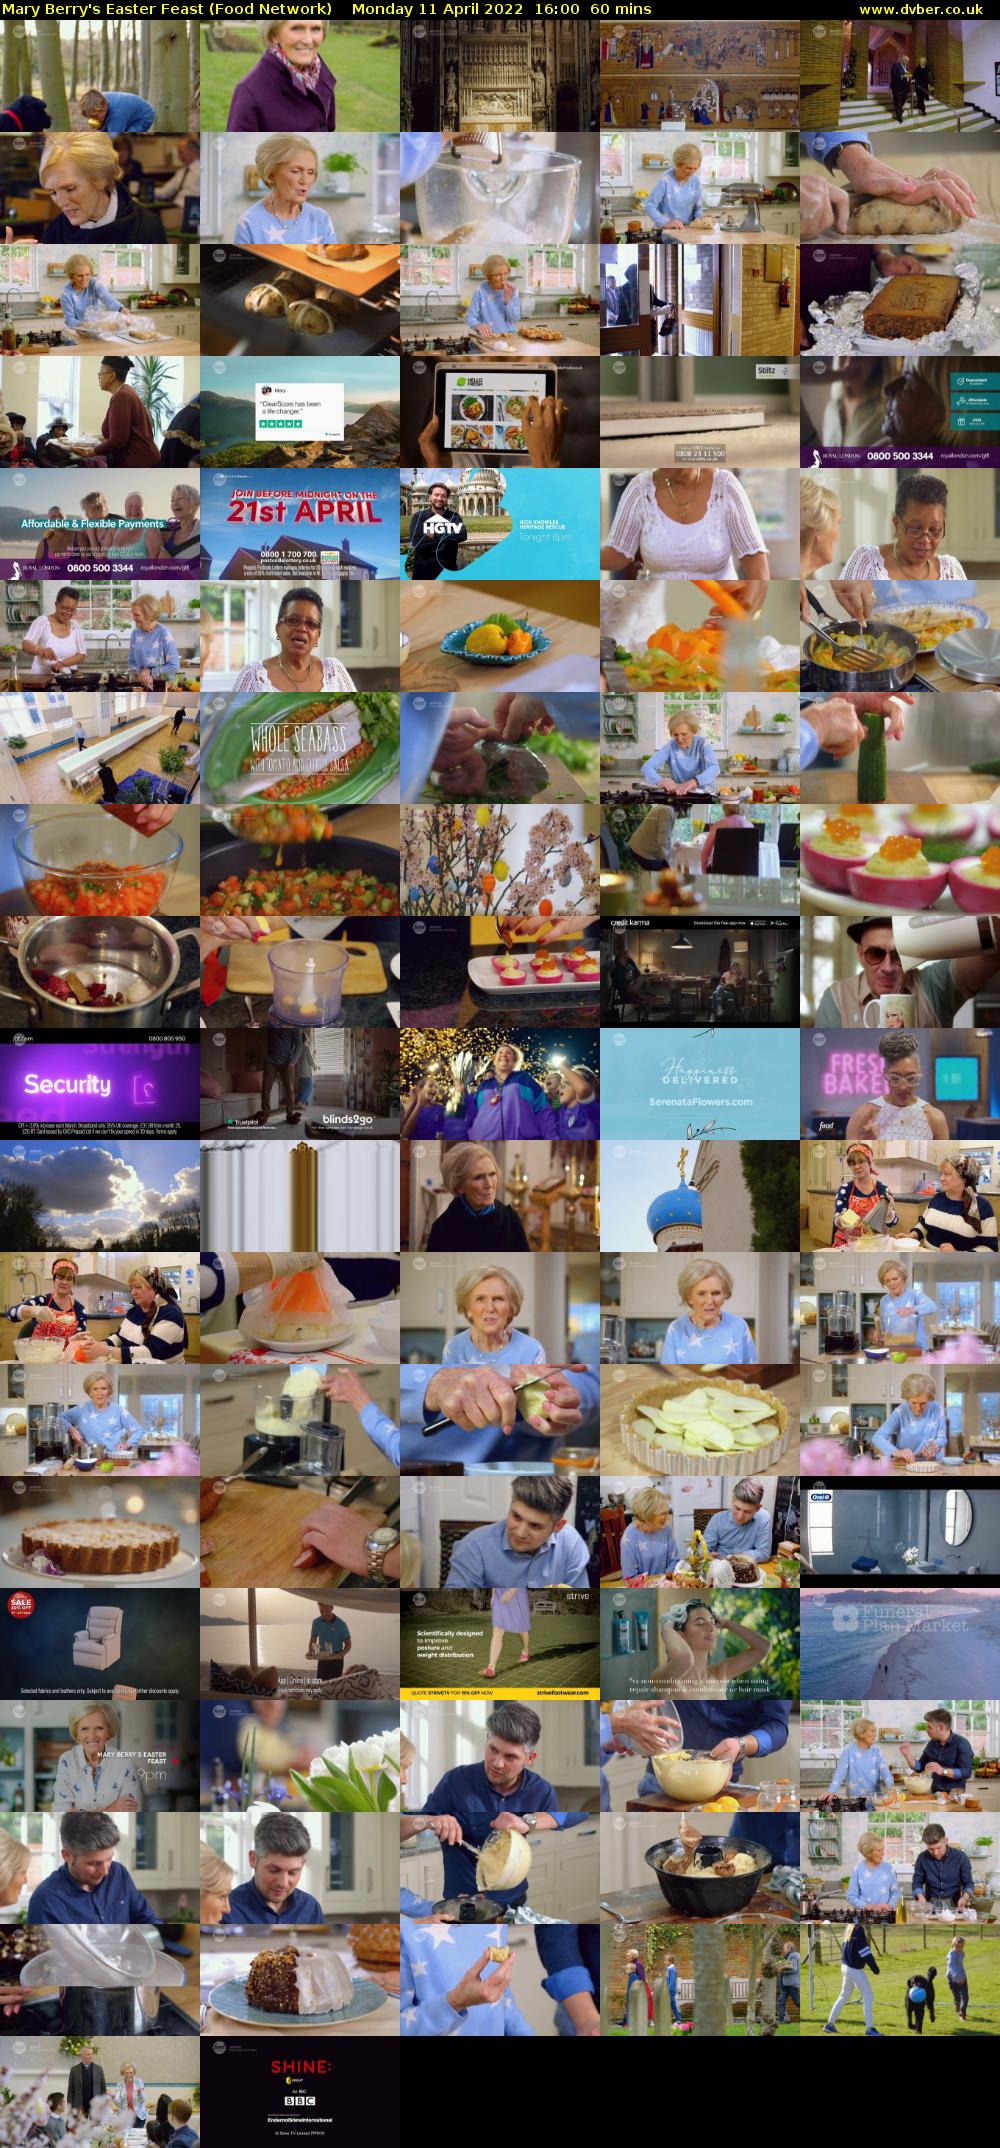 Mary Berry's Easter Feast (Food Network) Monday 11 April 2022 16:00 - 17:00